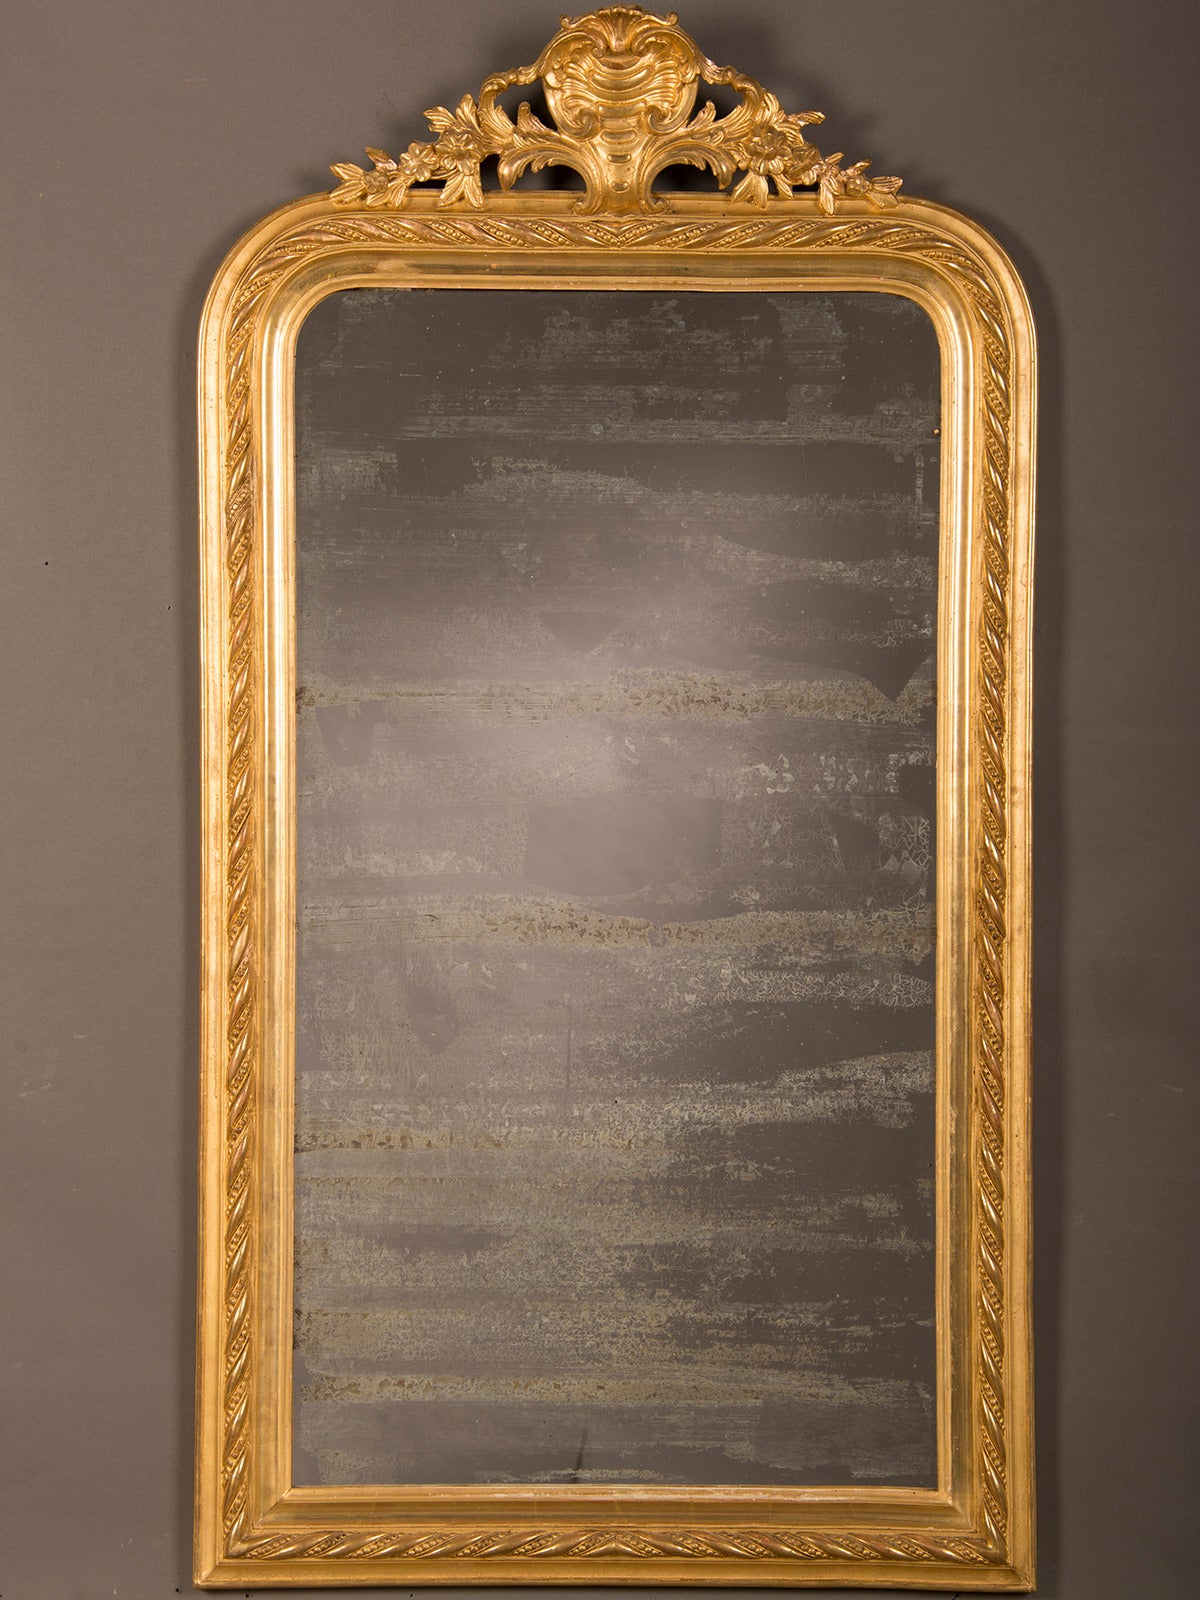 A Louis Philippe style gold leaf frame surrounding the original mirror glass from France circa 1885. This exceptional mirror and frame showcase a wonderful contrast between the decorative nature of the frame and the fantastic aspect of the aged and